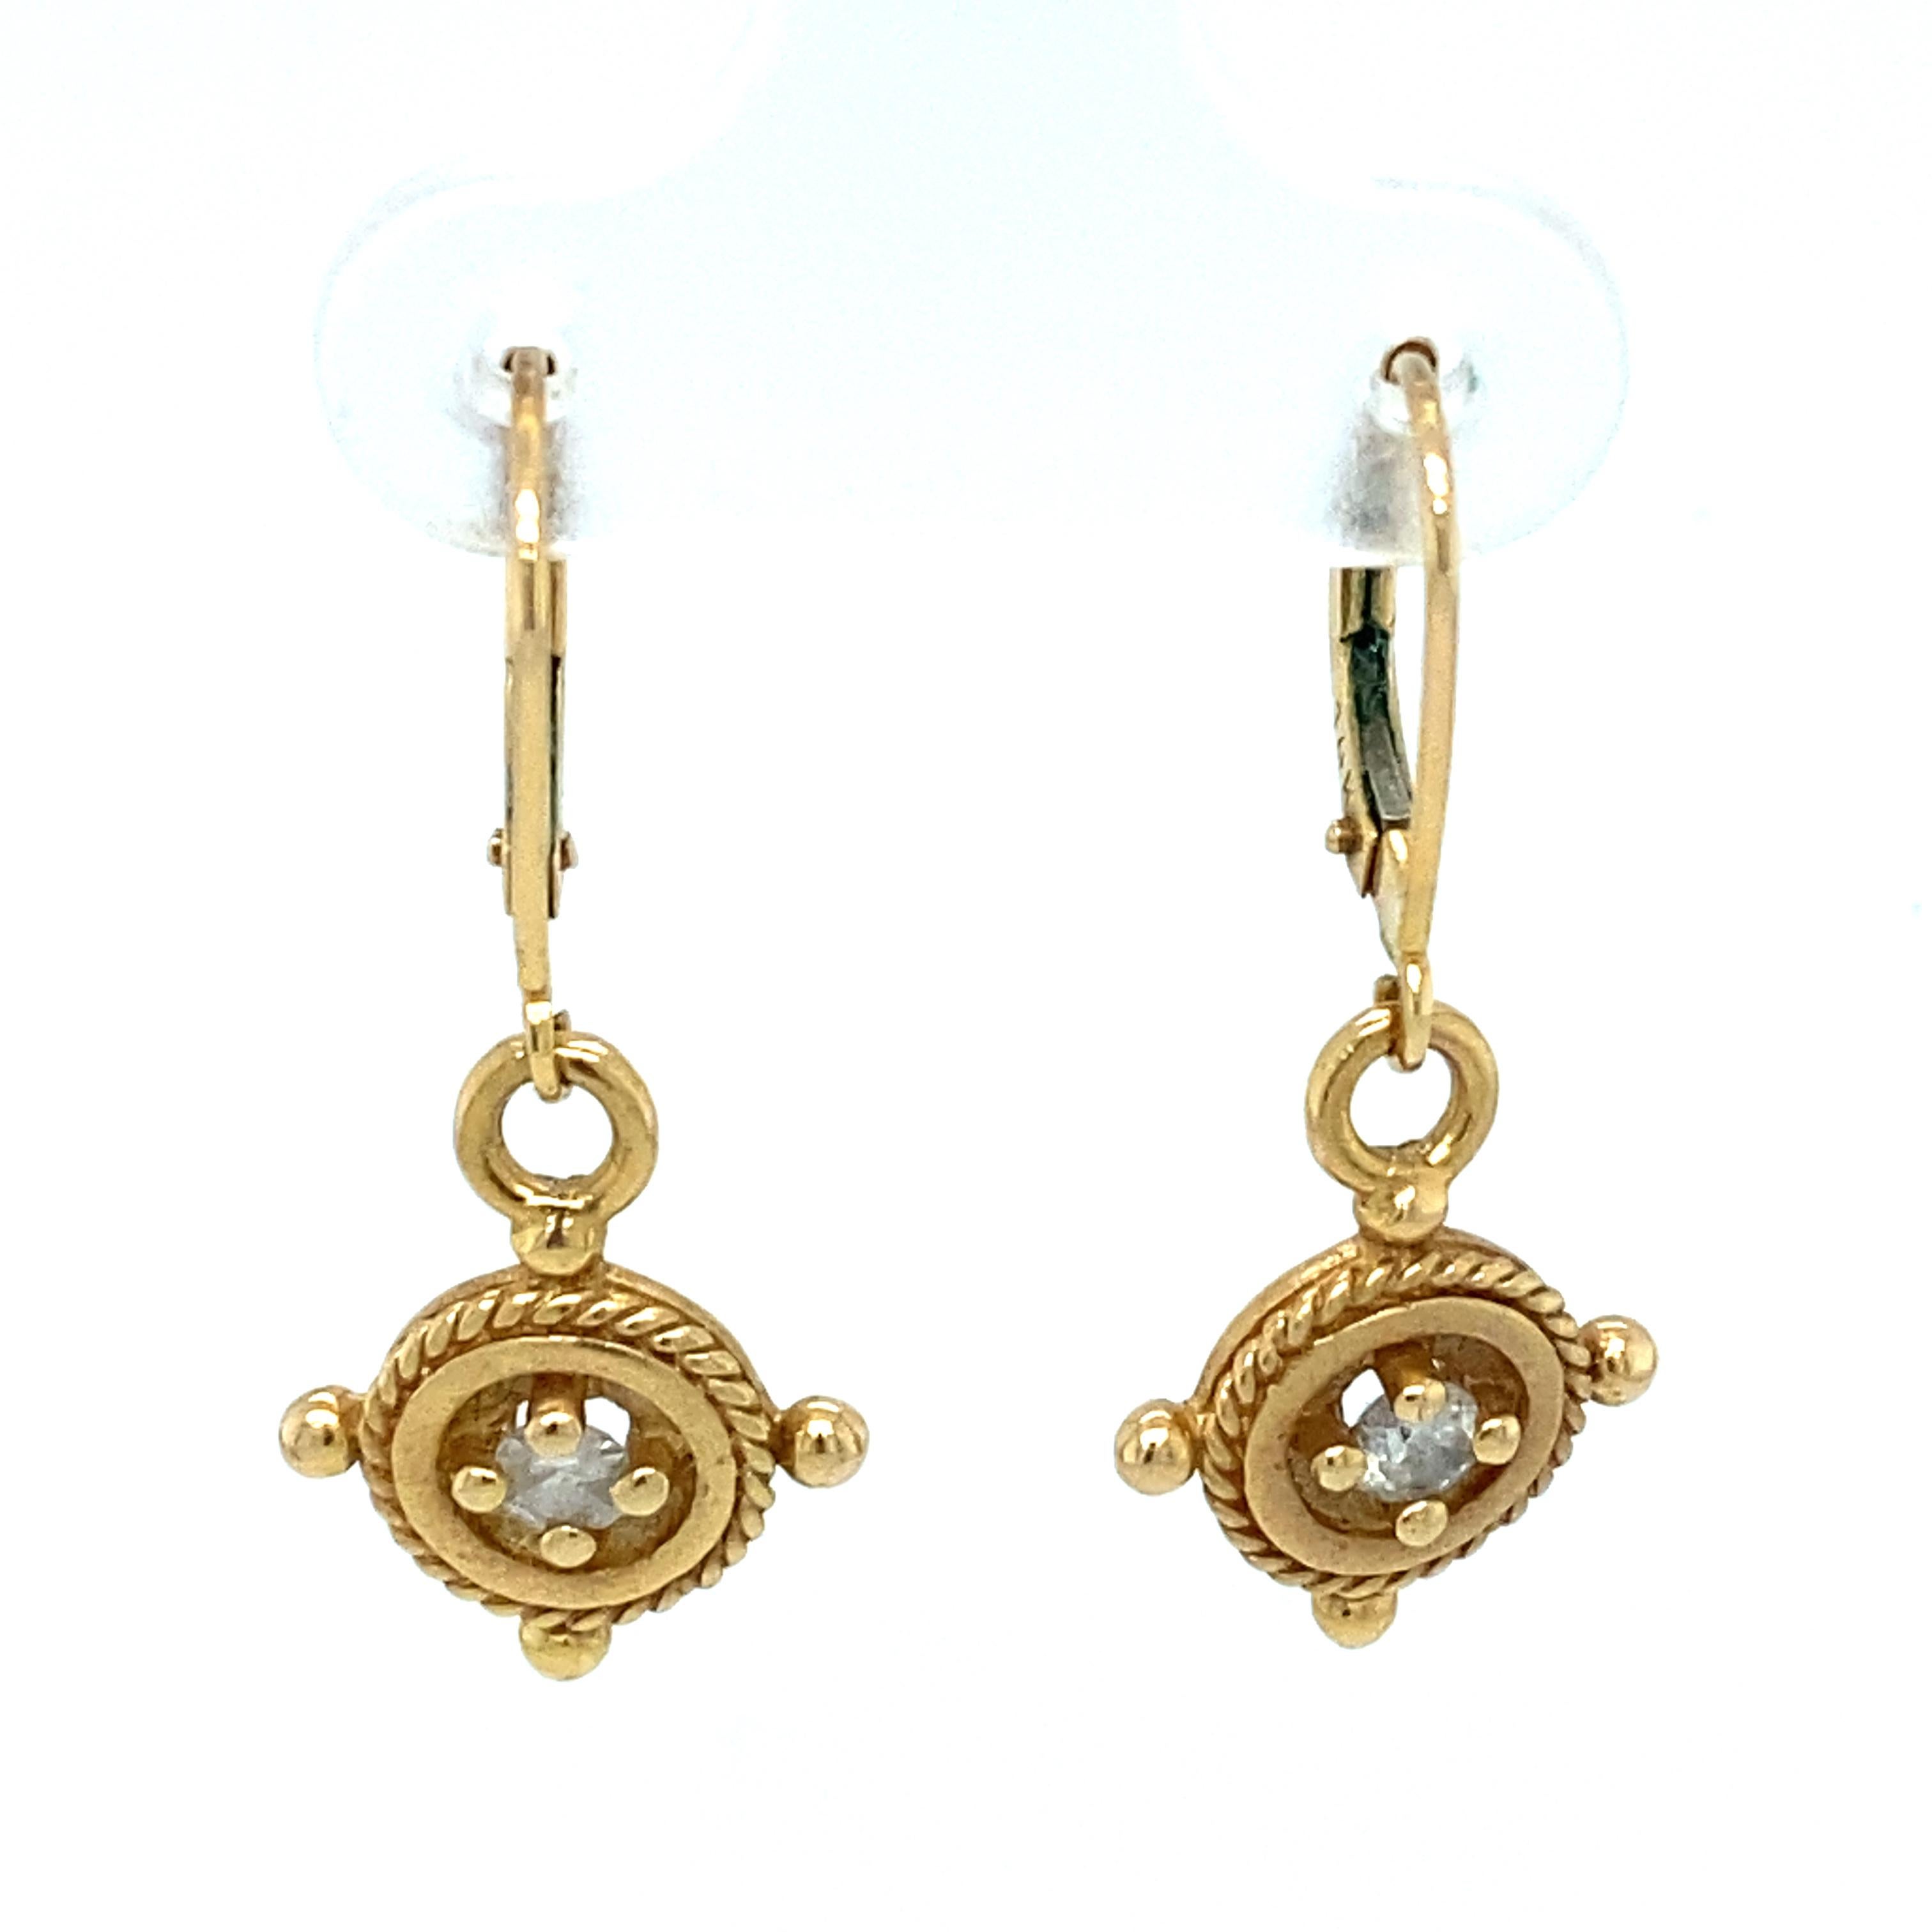 Item Details: These earrings have a unique circular design with diamonds in the center. They have lever backs and are crafted in 14 Karat Gold.

Circa: 2000s
Metal Type: 14 Karat Yellow Gold
Weight: 3.2 grams

Diamond Details:

Carat: Approximately